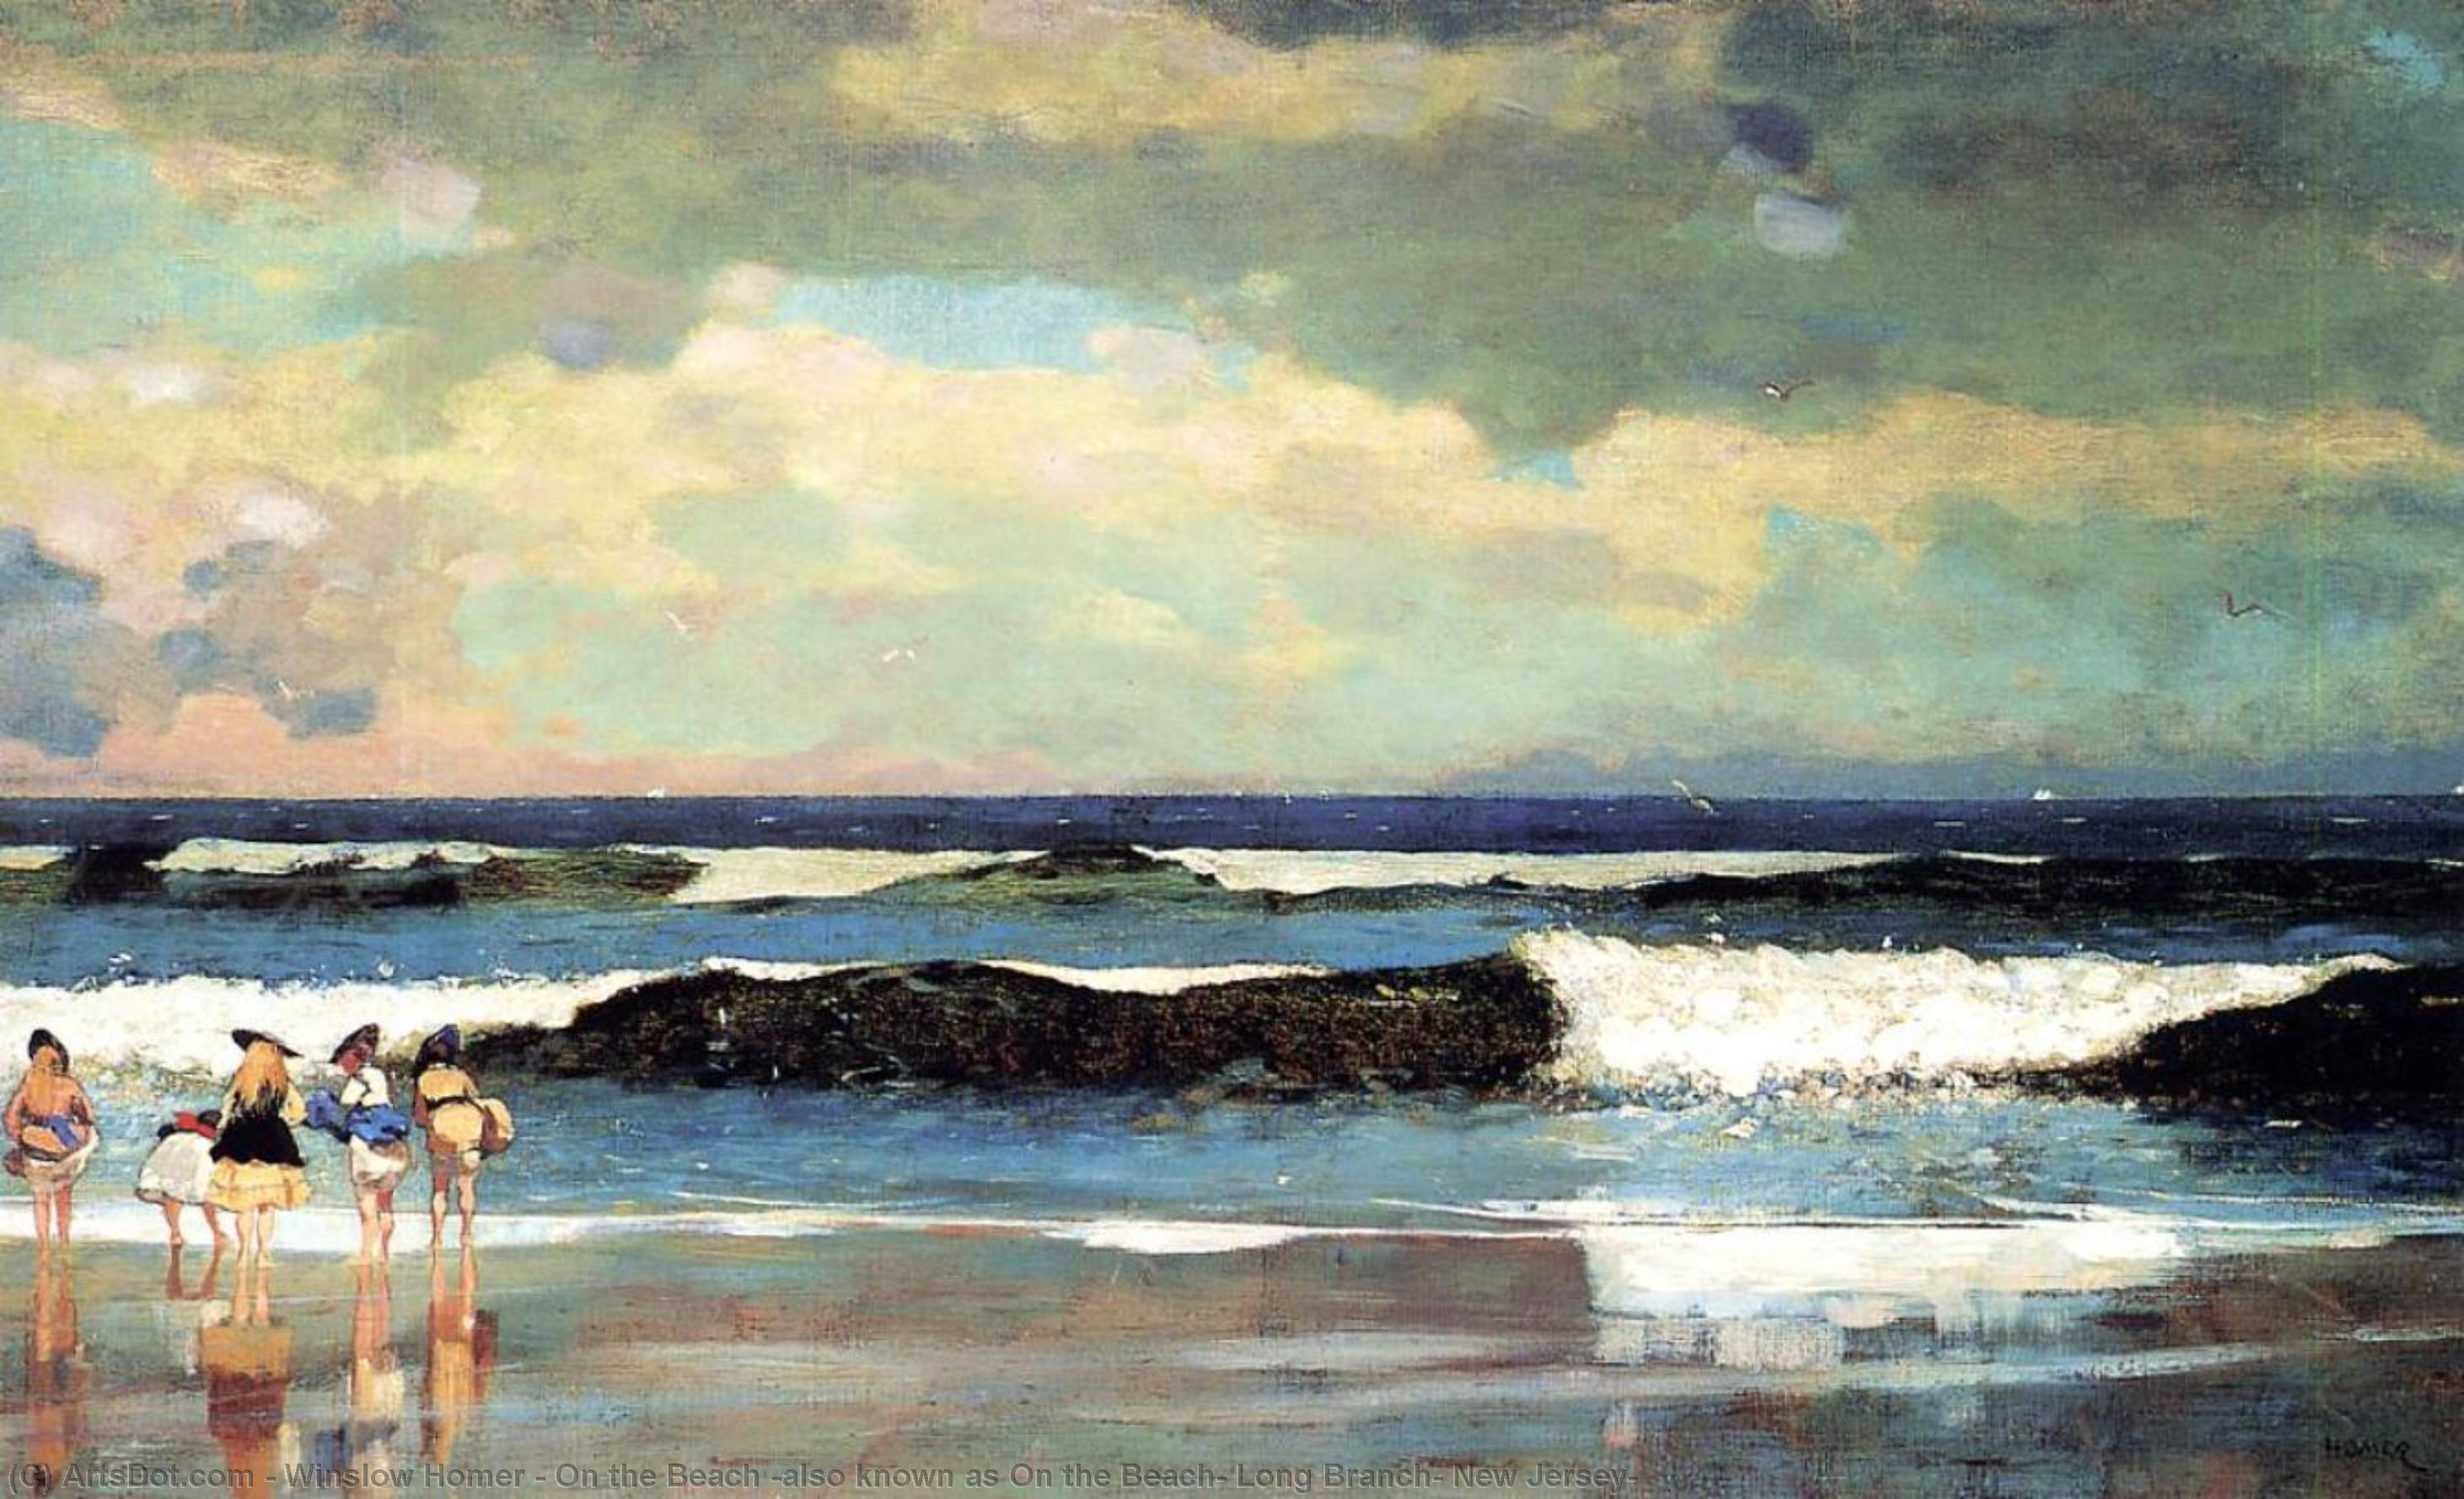 Order Oil Painting Replica On the Beach (also known as On the Beach, Long Branch, New Jersey), 1869 by Winslow Homer (1836-1910, United States) | ArtsDot.com